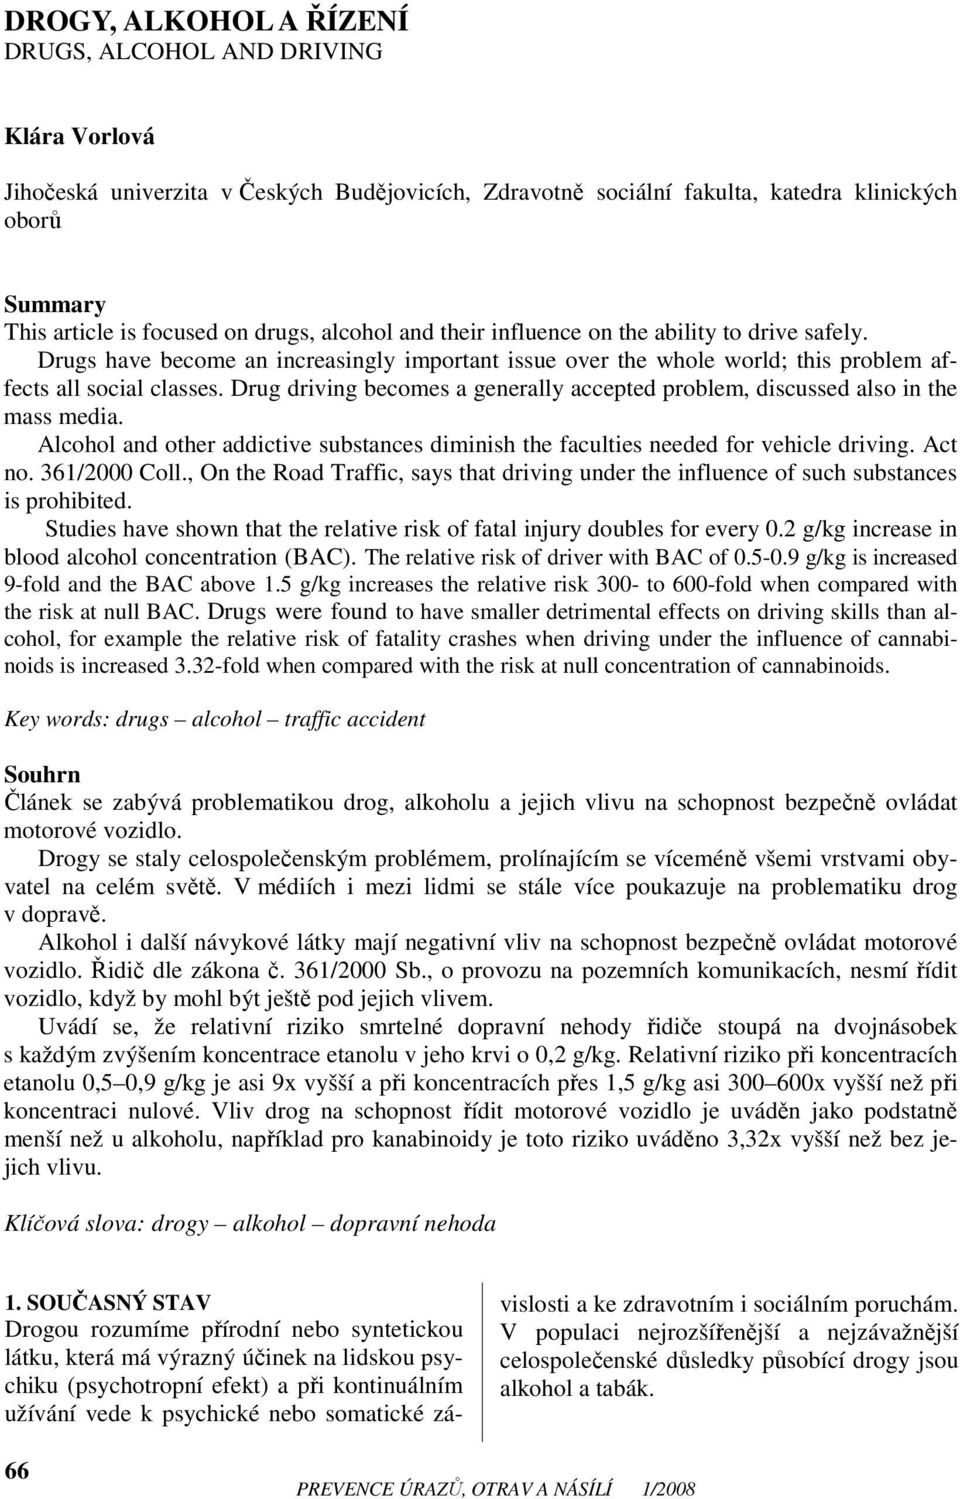 Drug driving becomes a generally accepted problem, discussed also in the mass media. Alcohol and other addictive substances diminish the faculties needed for vehicle driving. Act no. 361/2000 Coll.